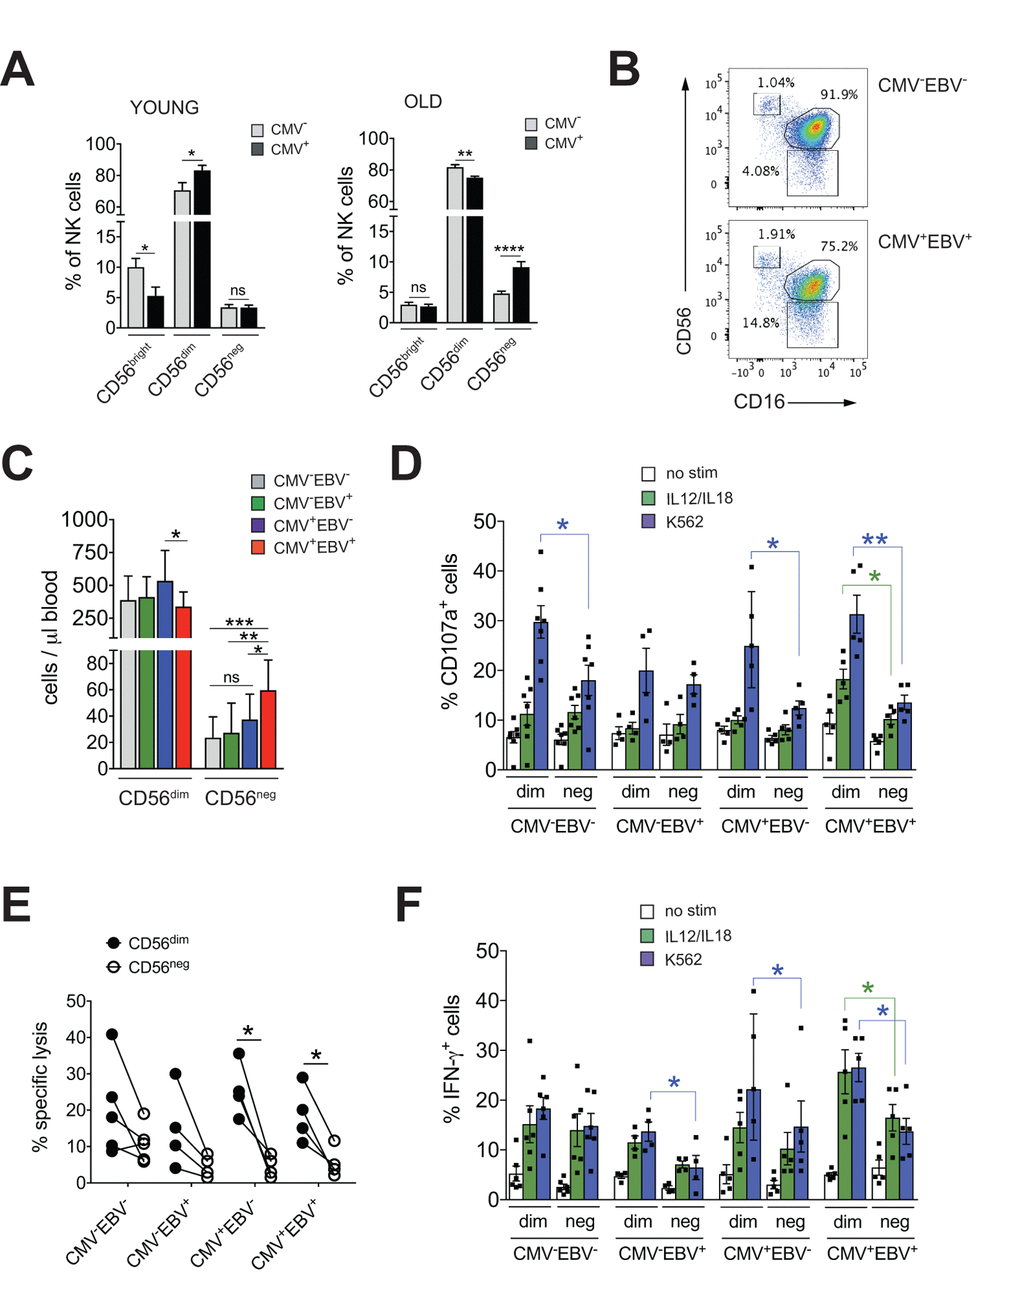 CD56neg NK cells with impaired effector function expand in CMV and EBV co-infected individuals >60 years of age. (A) Frequencies of CD56bright, CD56dim and CD56neg NK cells in YOUNG (– (gray bars, n=10/10) and CMV+ (black bars, n=10/10) individuals compared to OLD (>60 years) CMV- (gray bars, n=20/21) and CMV+ (black bars, n=17/20) donors analyzed as in Supplementary Figure S1A. (B) Representative FACS dot plots from a CMV–EBV– and a CMV+EBV+ donor are shown. Numbers indicate the percentage of cells within total NK cells in peripheral blood. (C) Absolute cell numbers for CD56dim and CD56neg NK cells – as determined by FACS analysis in total PBMCs– are shown in a cohort of HDs >60 years of age stratified as CMV–EBV– (n=11/11), CMV–EBV+ (n=10/24), CMV+EBV– (n=6/6), and CMV+EBV+ (n=12/14). (D-F) FACS-sorted CD56dim and CD56neg NK cells from CMV–EBV– (n=7), CMV–EBV+ (n=4), CMV+EBV- (n=4) and CMV+EBV+ (n=5) donors were either left un-stimulated (empty bars), stimulated with IL-12 / IL-18 (green bars) or K562 target cells (blue bars) and (D) CD107a expression (E) target cell lysis and (F) IFN-γ production were assessed after 6 hours of (co-)culture. Parametric data were compared by Student’s t-test and are shown as mean ± SEM, non-parametric data by Mann-Whitney test and are shown as median ± IQR, respectively. * p≤0.05, ** p≤0.005, *** p≤0.005.